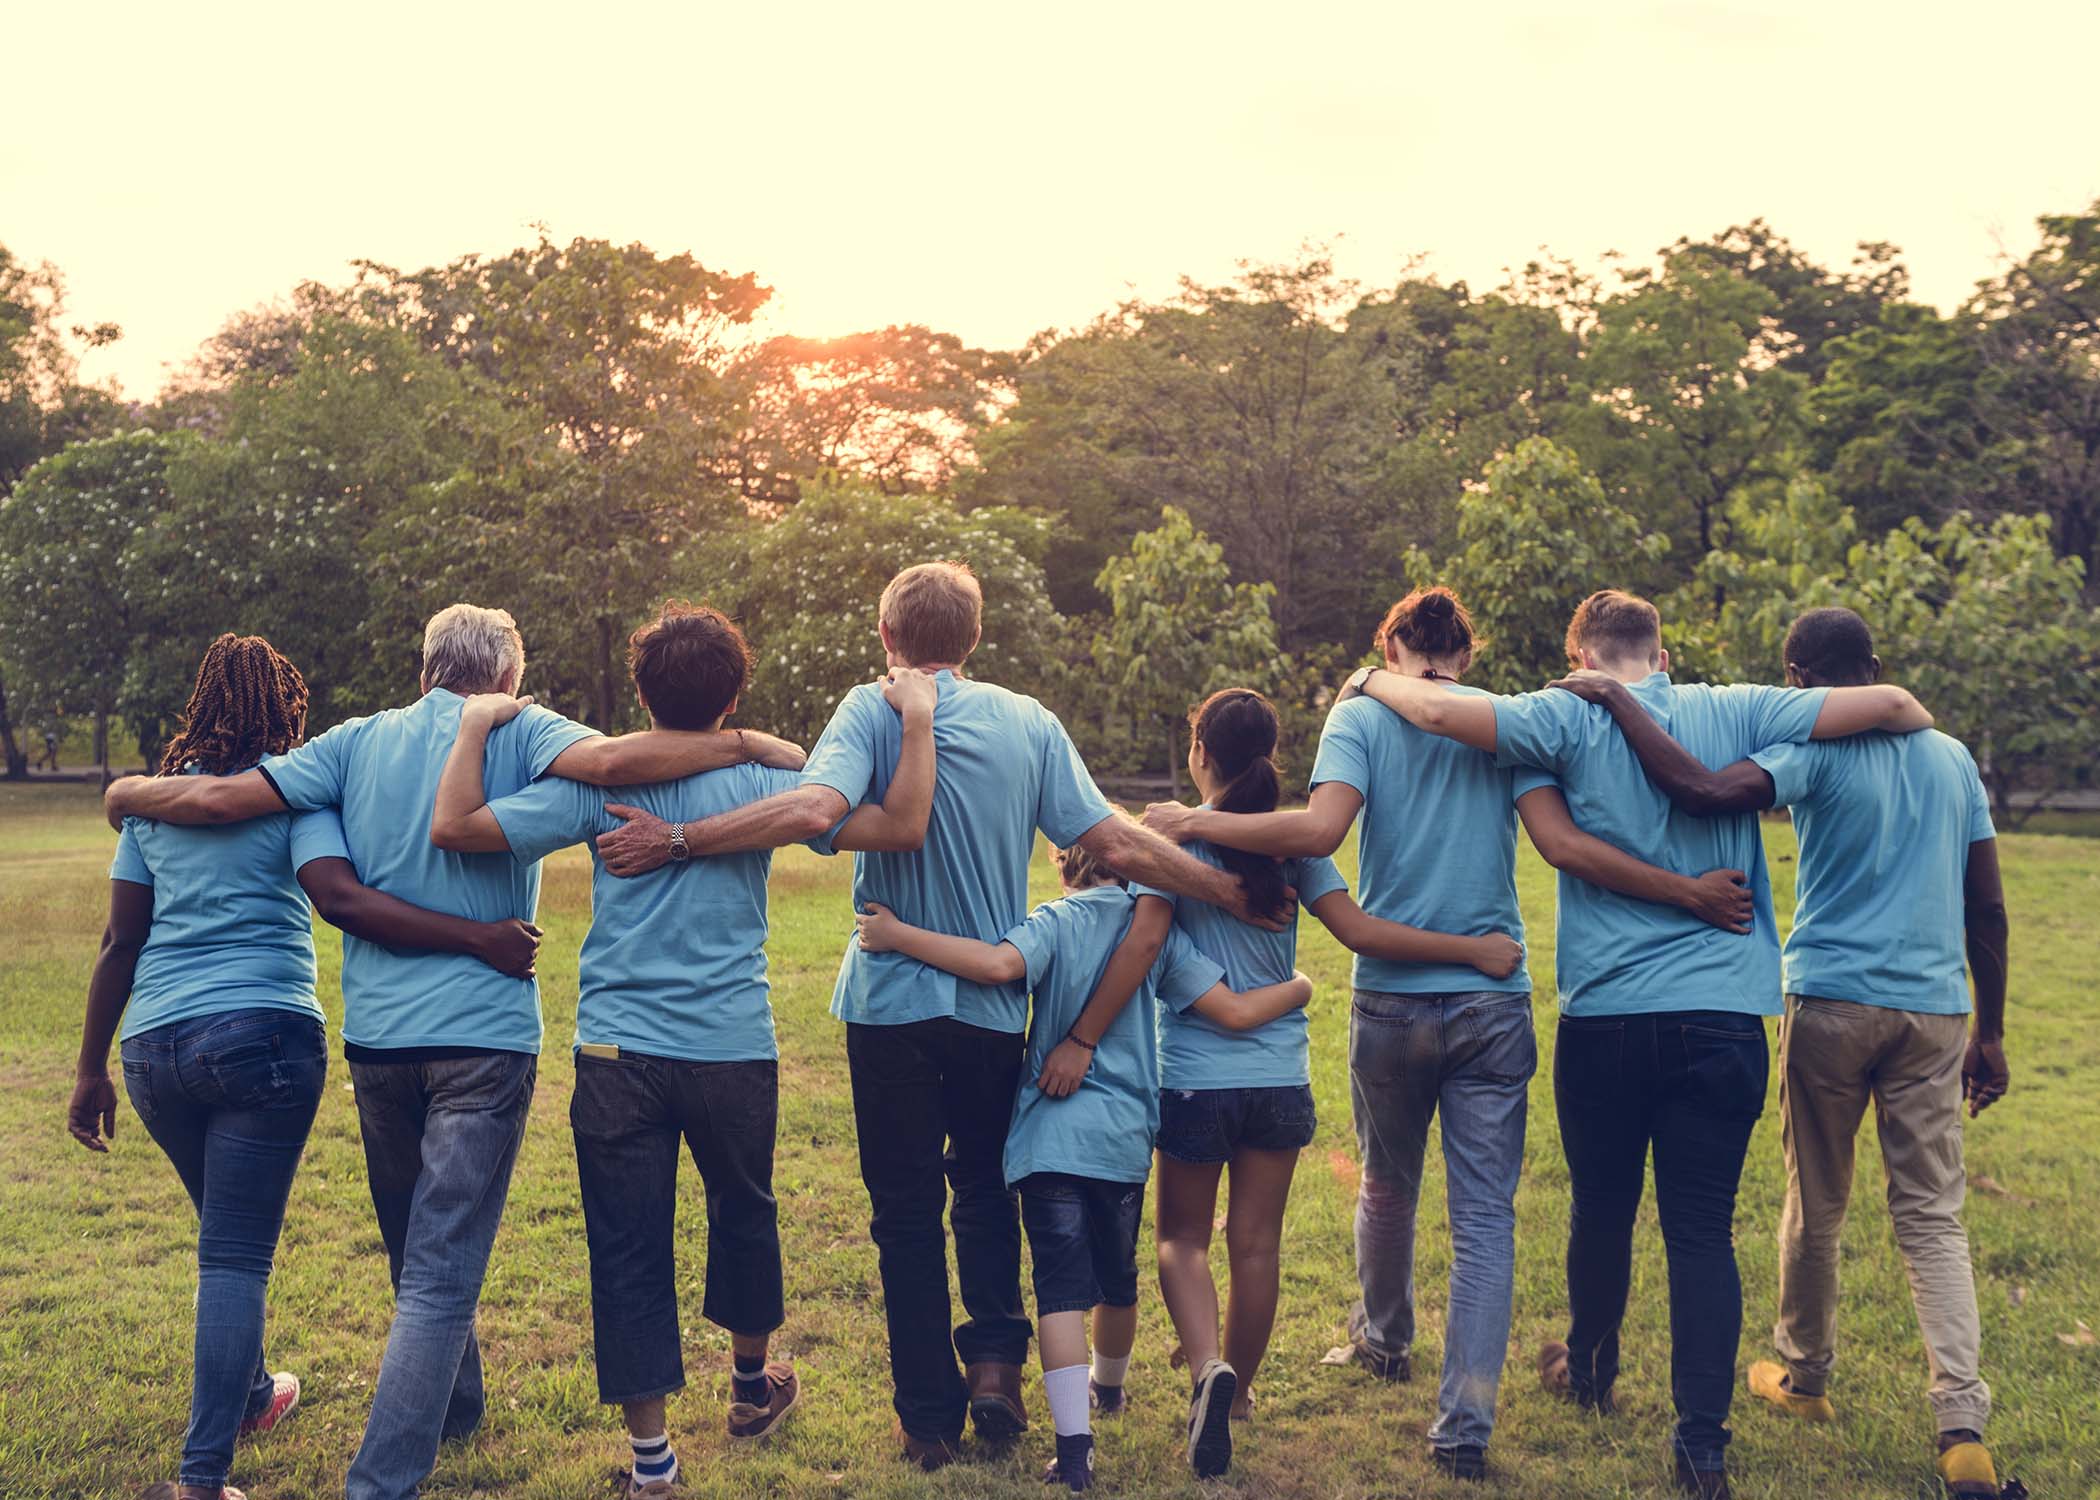 Image of a group hugging each other as a sign of community and collaboration.